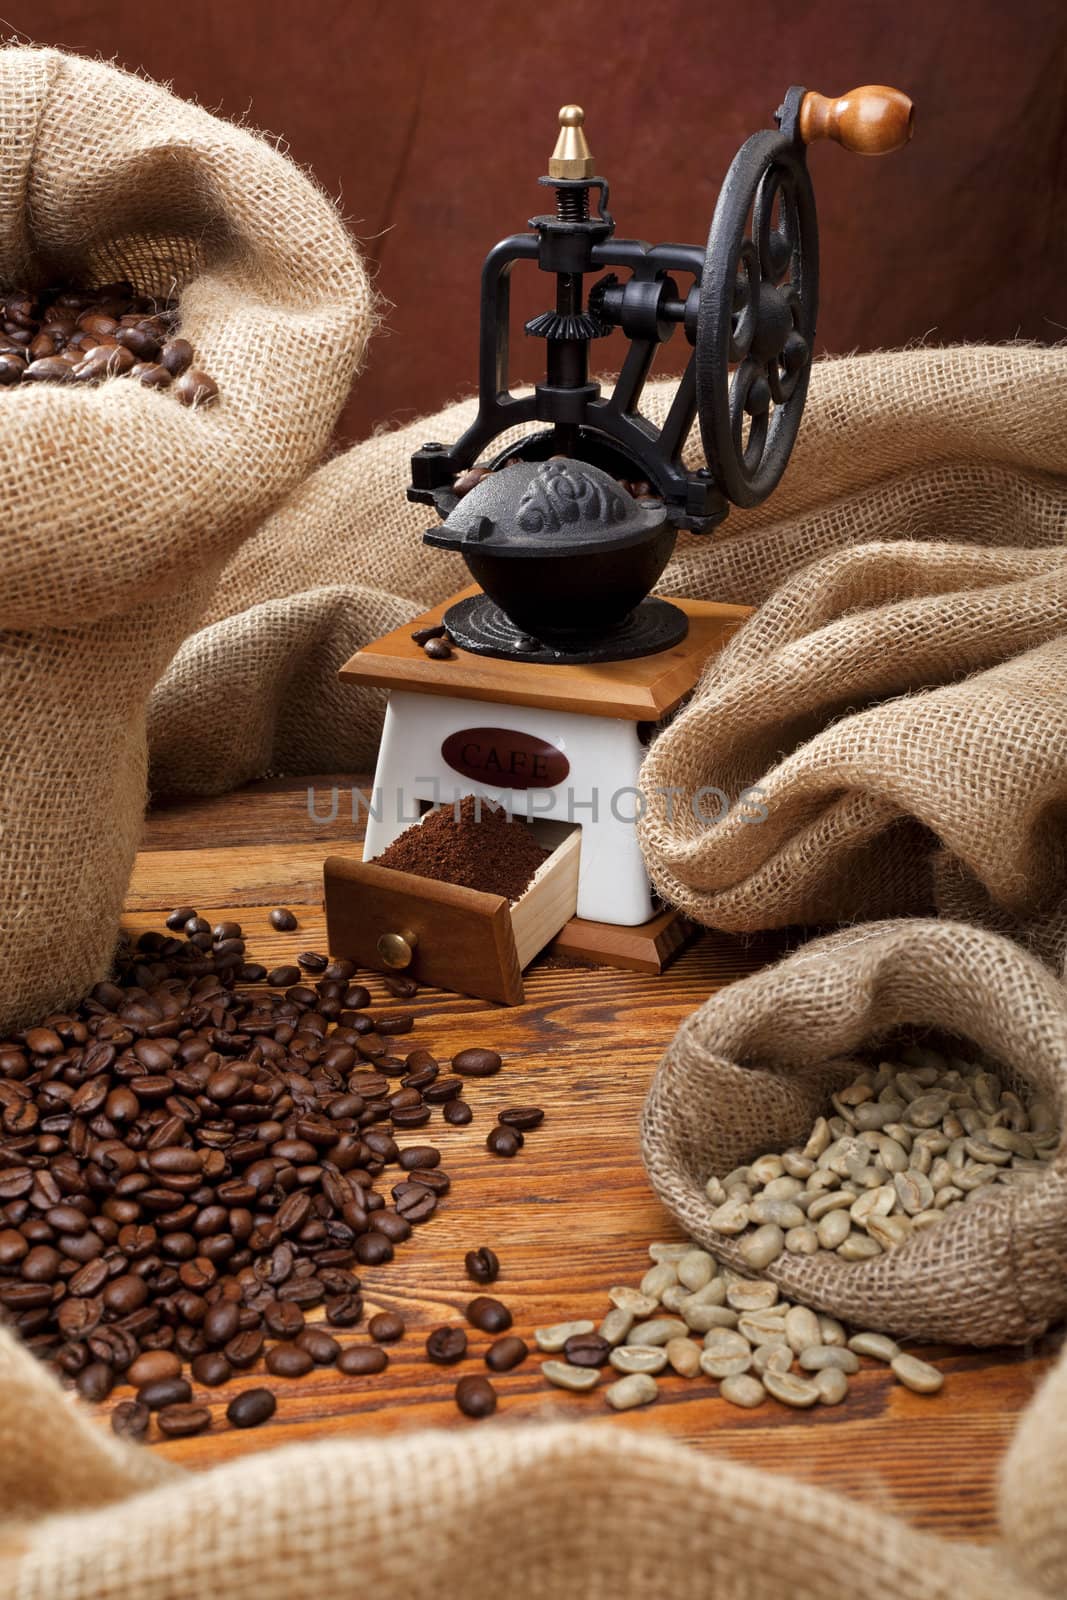 Studio photo of sack with scattered coffee and grinder